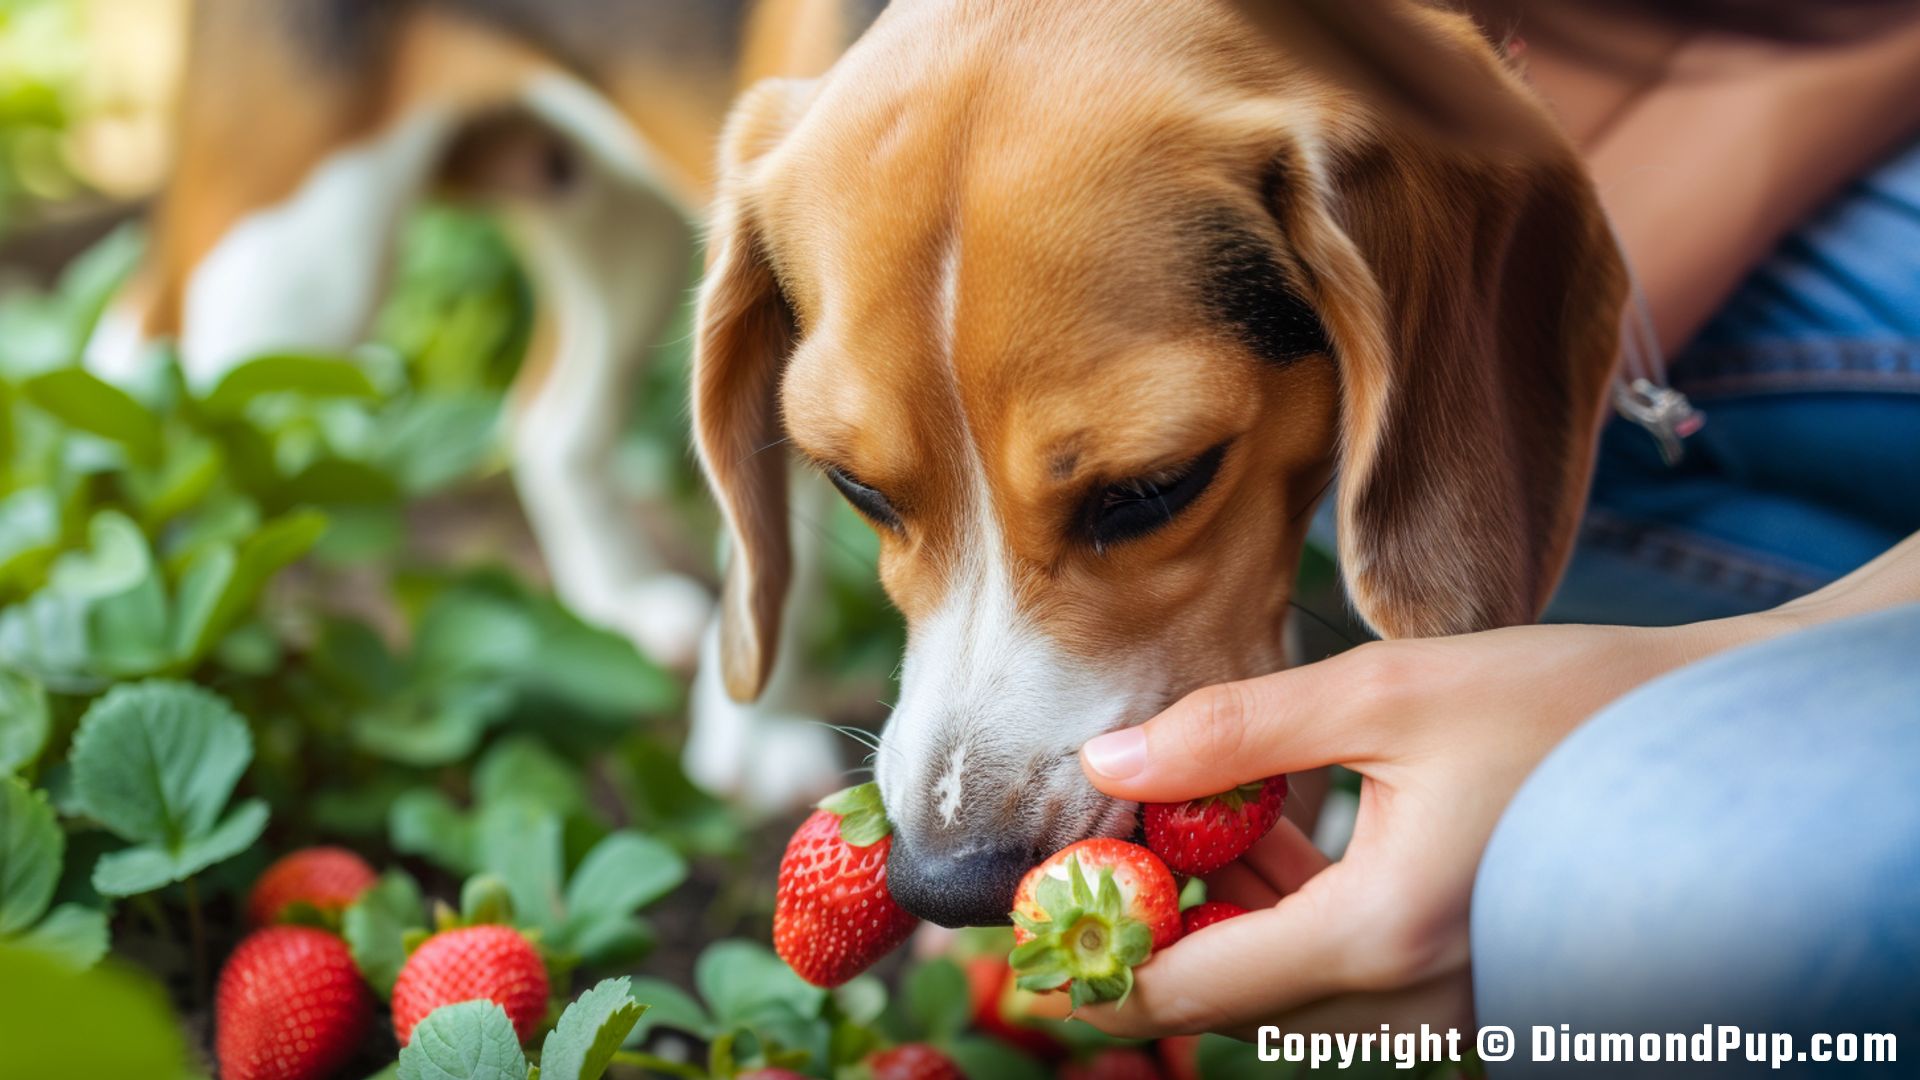 Photograph of a Playful Beagle Eating Strawberries